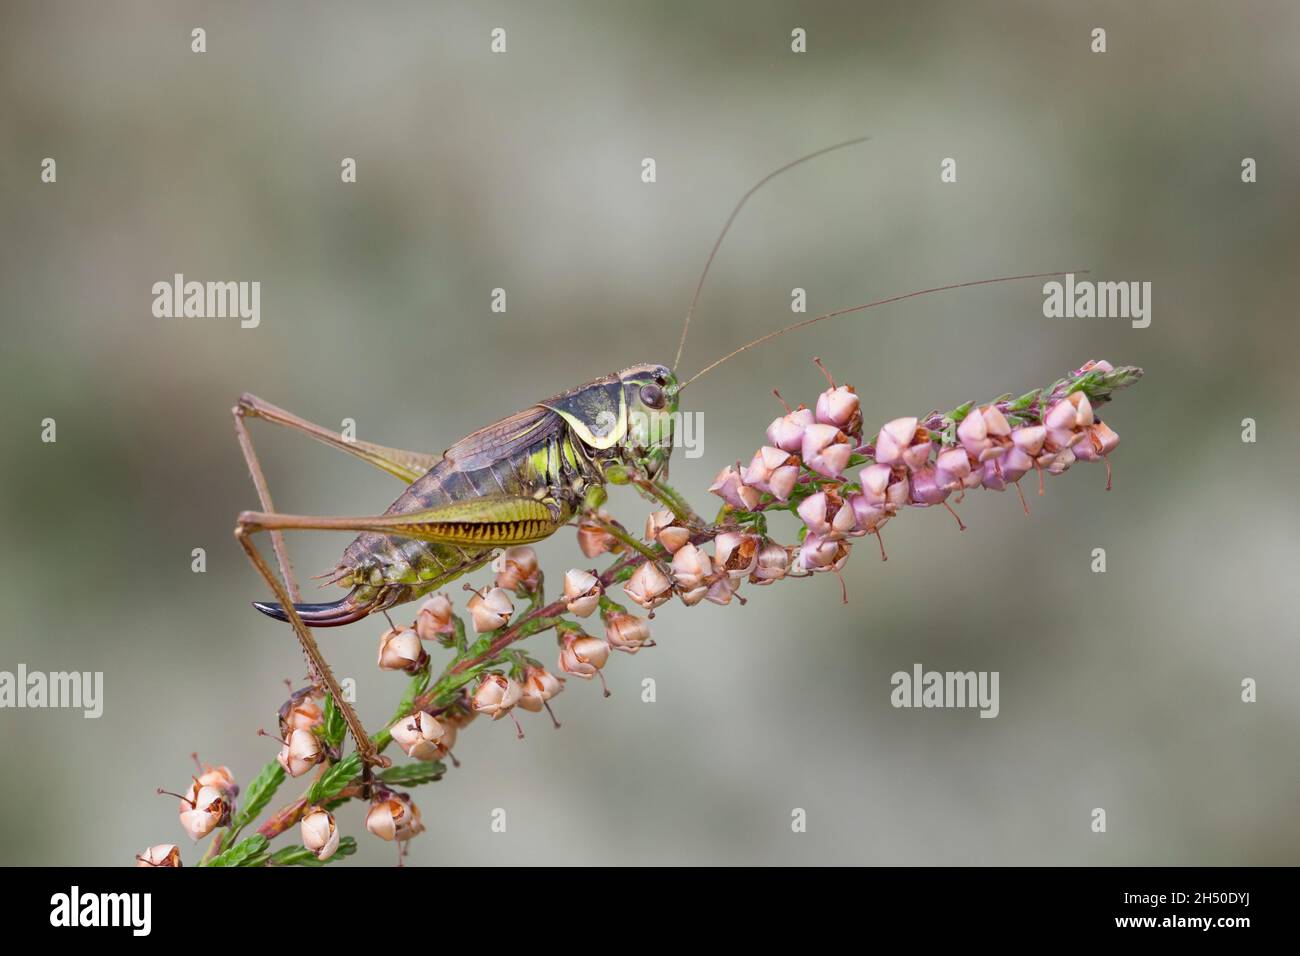 Roesels Beißschrecke, Rösels Beißschrecke, Roesels Beissschrecke, Weibchen, Roeseliana roeselii, Metrioptera roeselii, Roesel's bush cricket, Roesel's Stock Photo